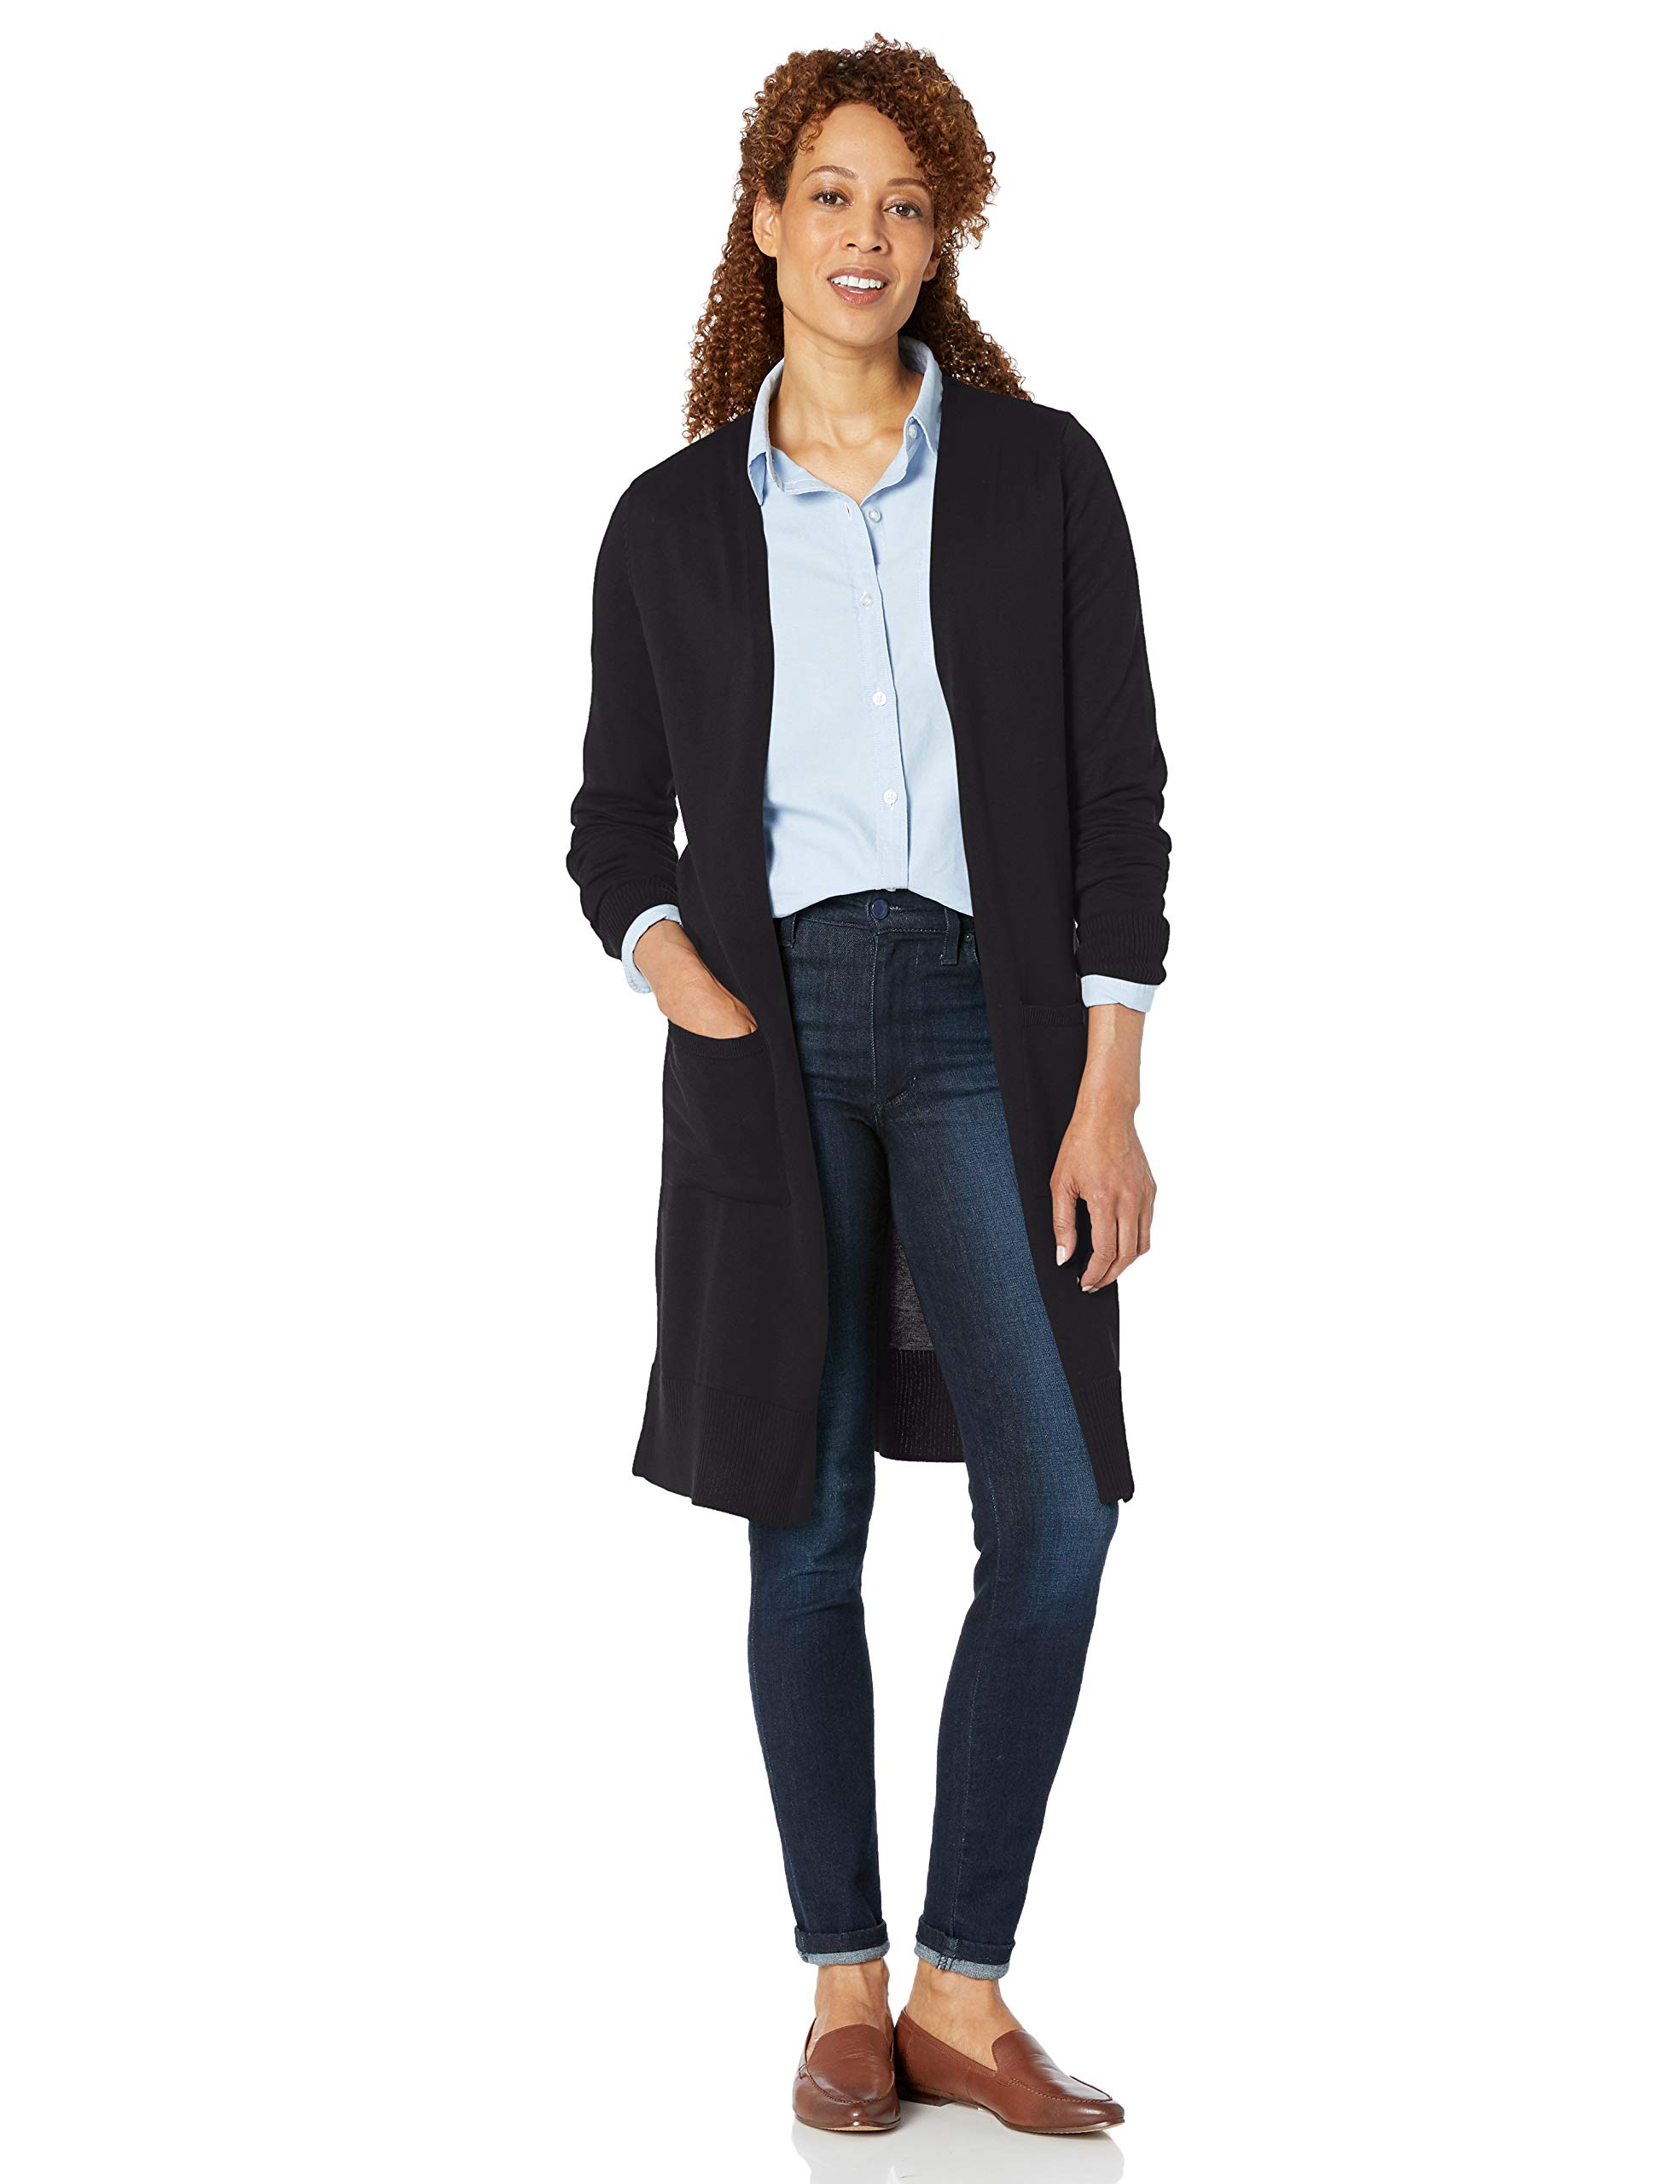 Amazon Essentials Women's Lightweight Longer Length Cardigan Sweater (Available in Plus Size)